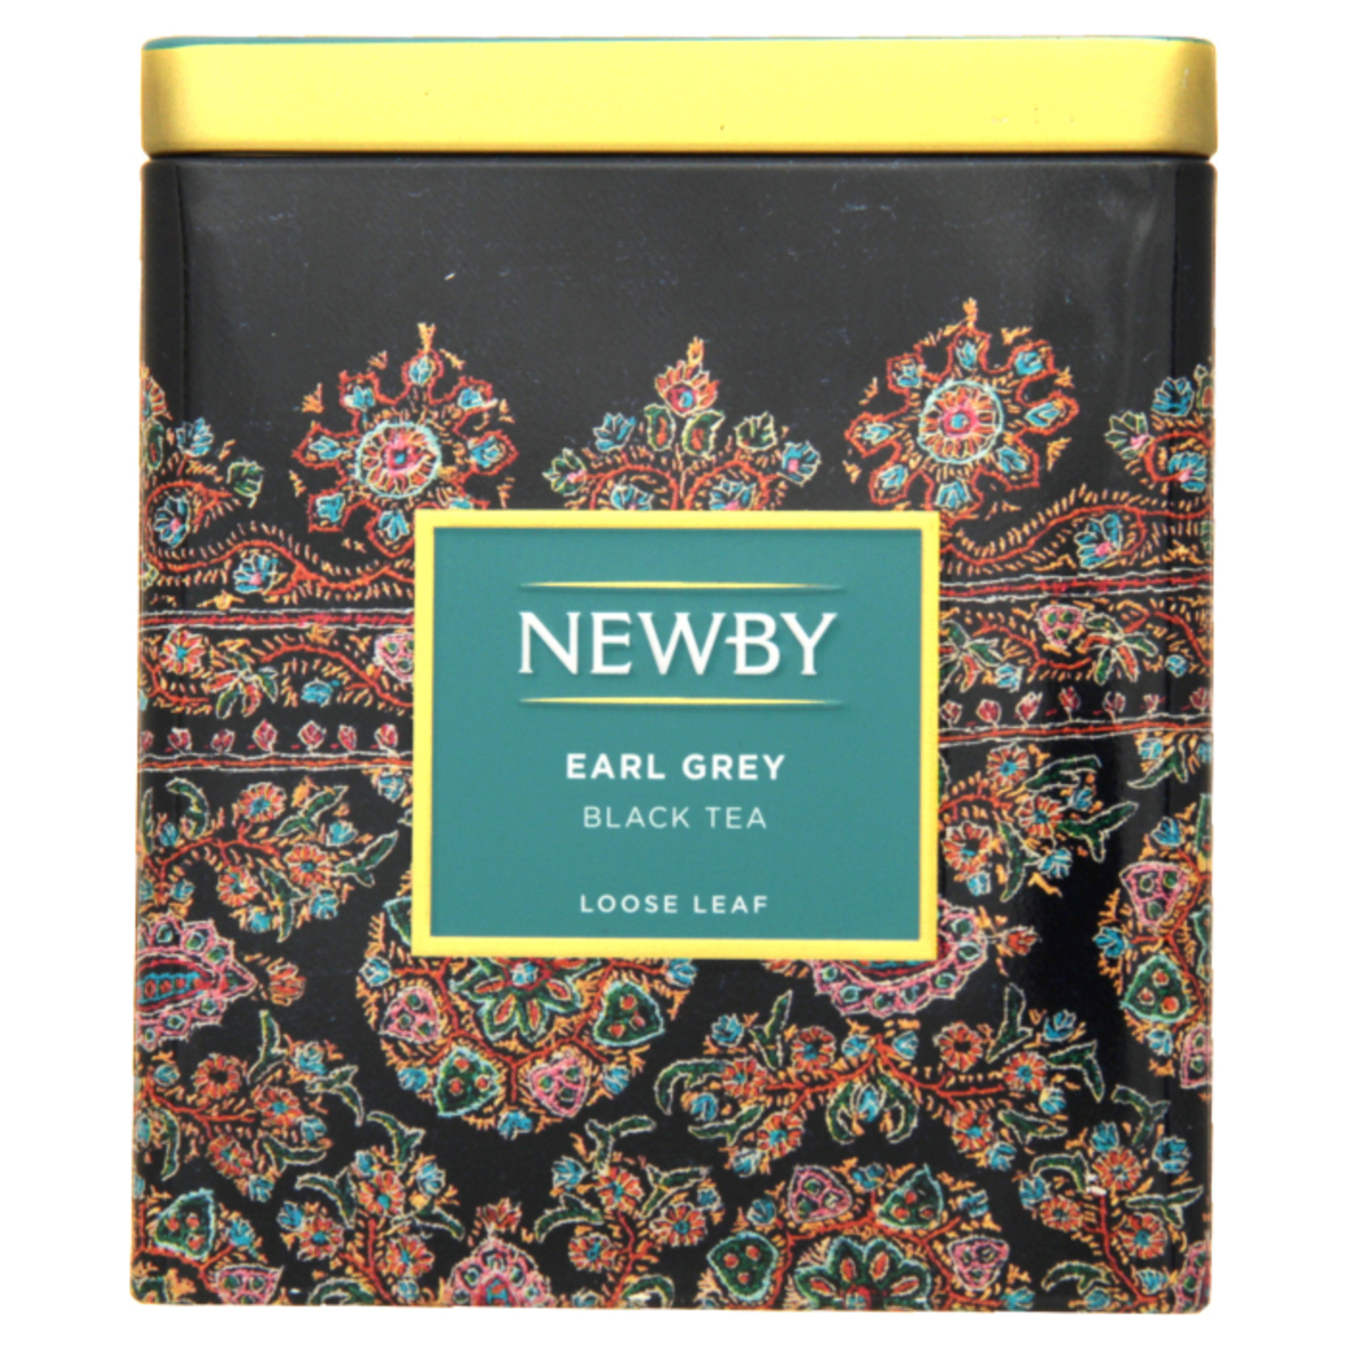 Black tea Newby flavored Earl gray 125g iron can